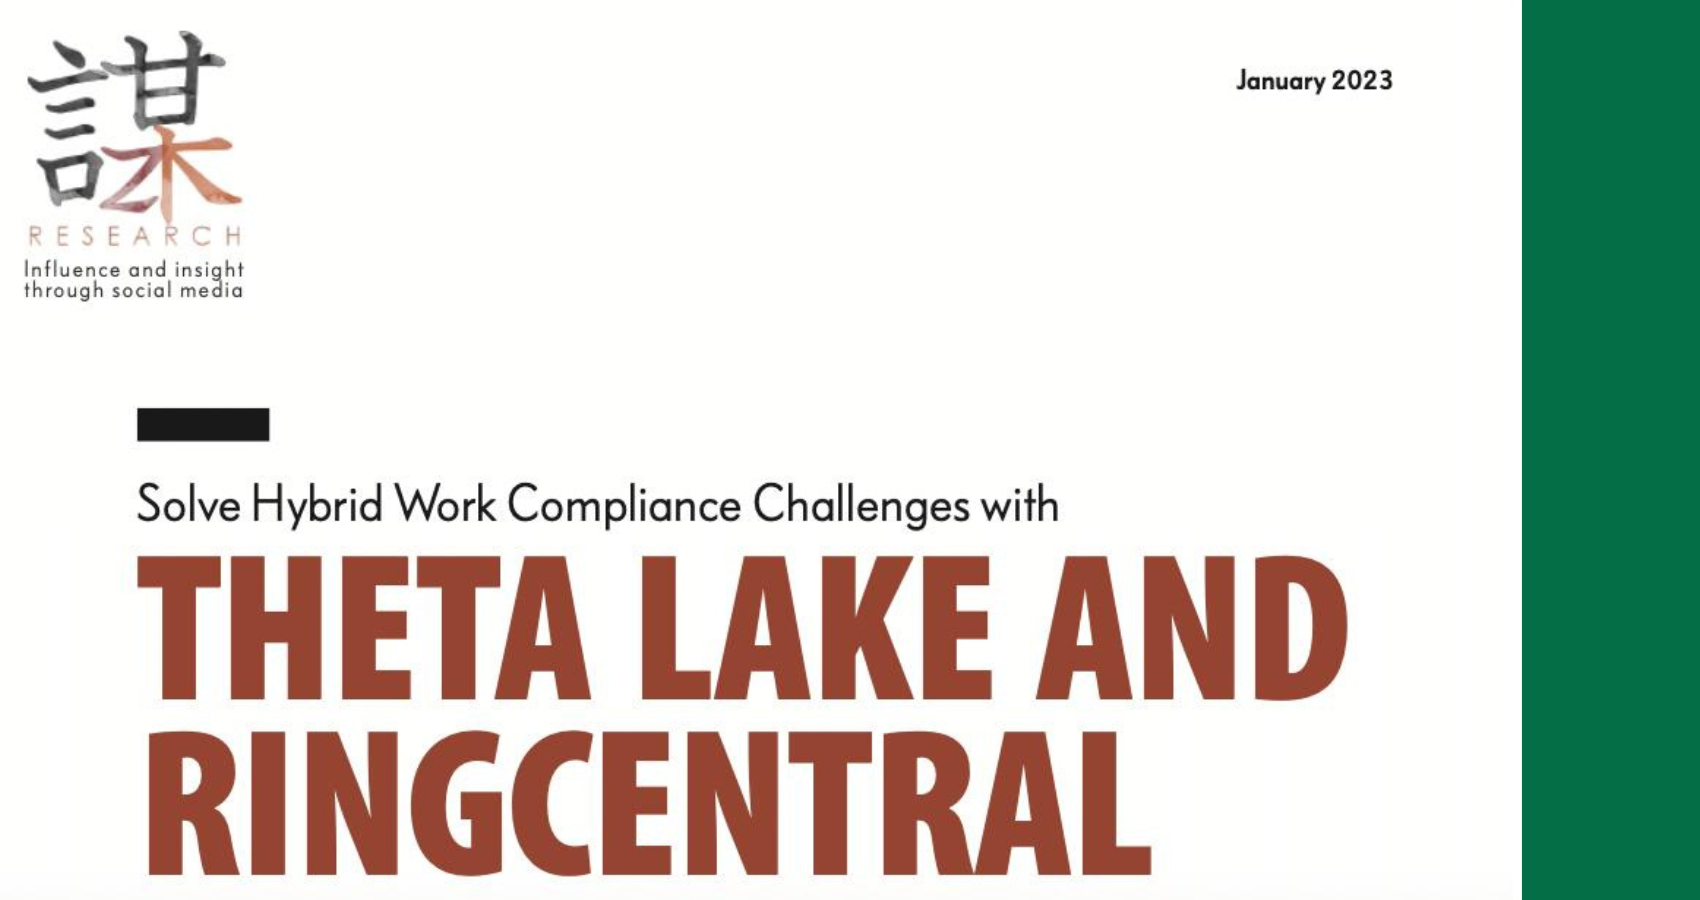 WhitePaper ZKResearch ThetaLake RingCentral